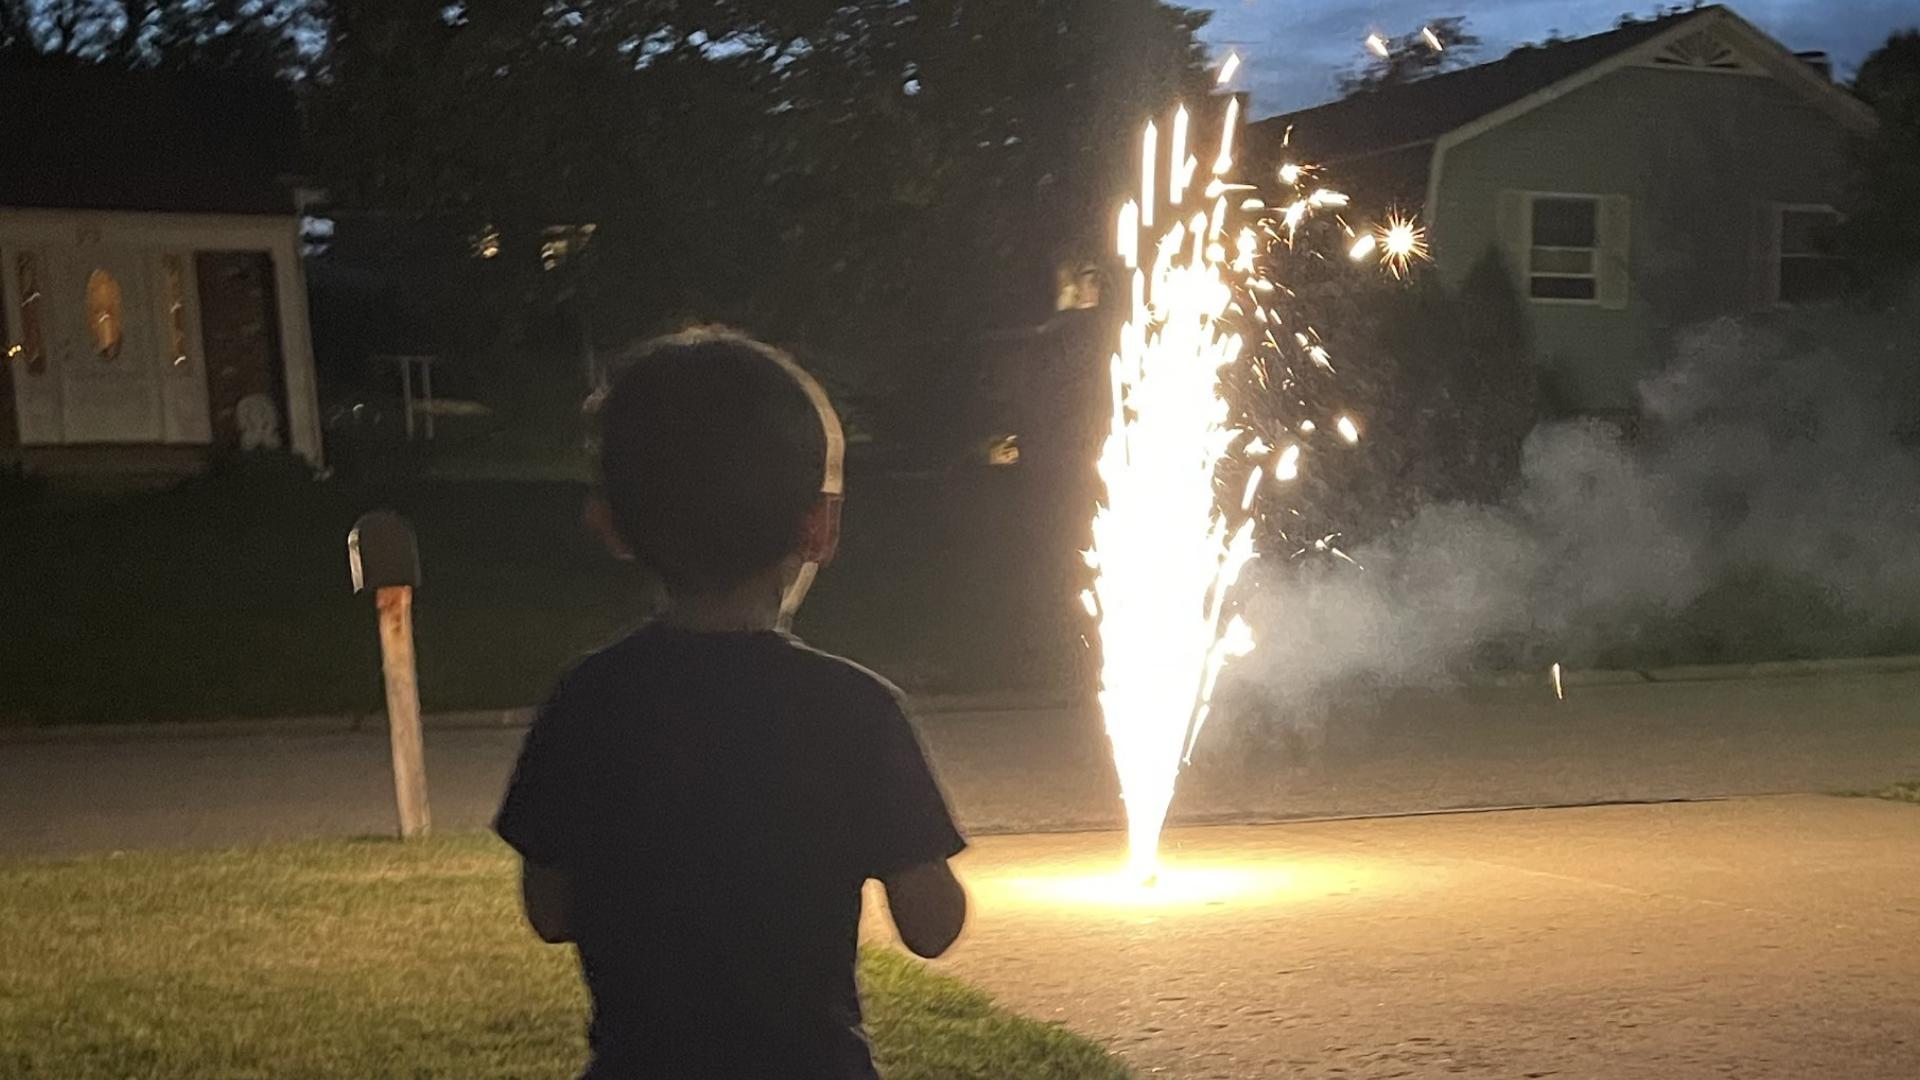 Owen watched the silent fireworks